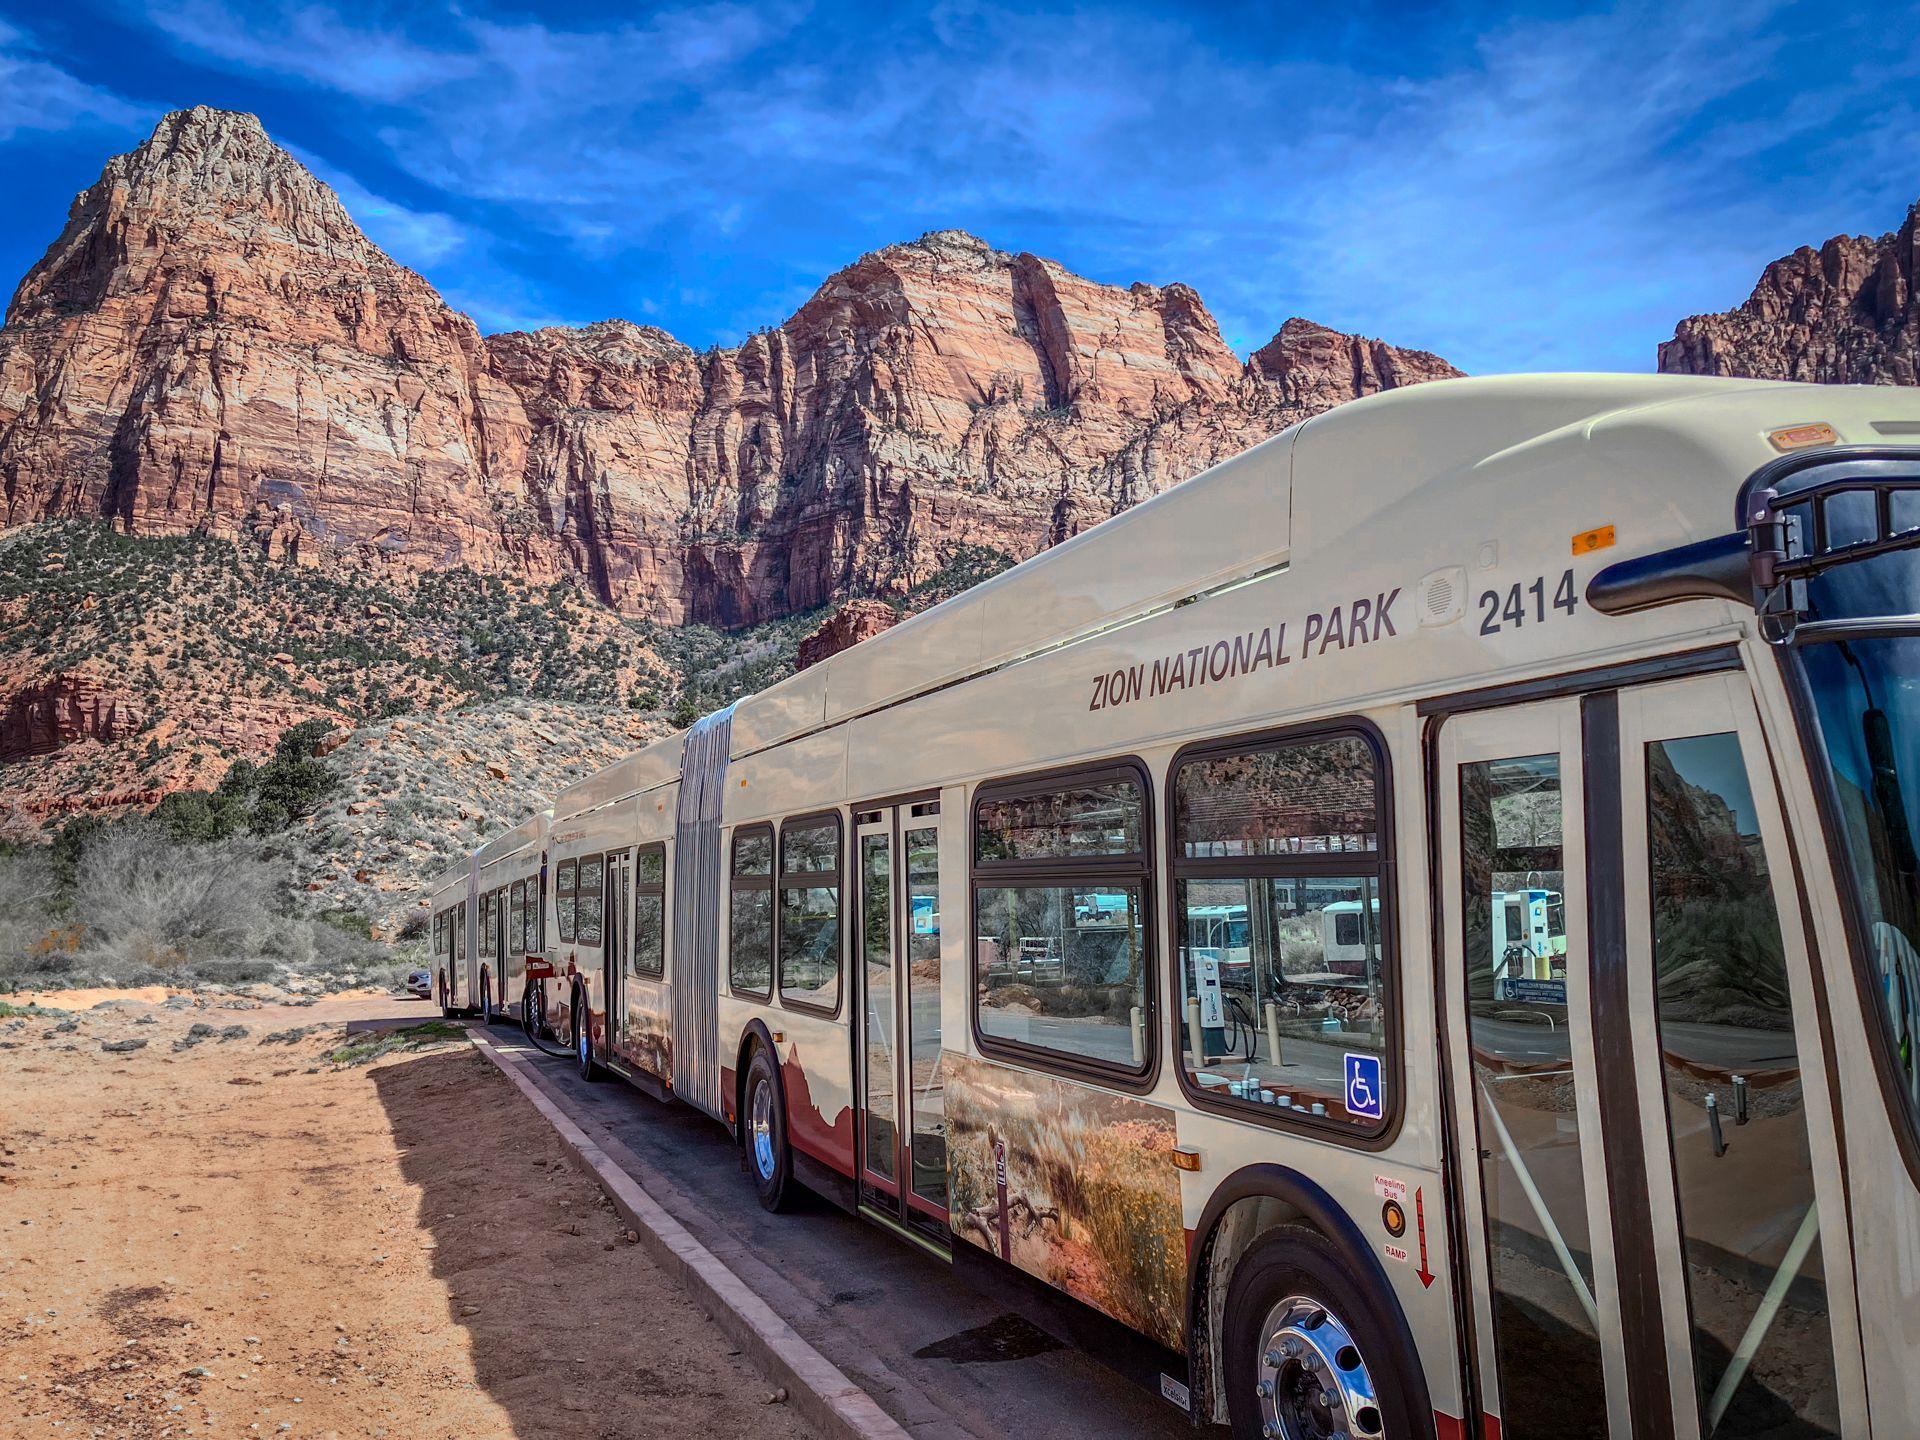 Electric bus at Mt Zion National Park